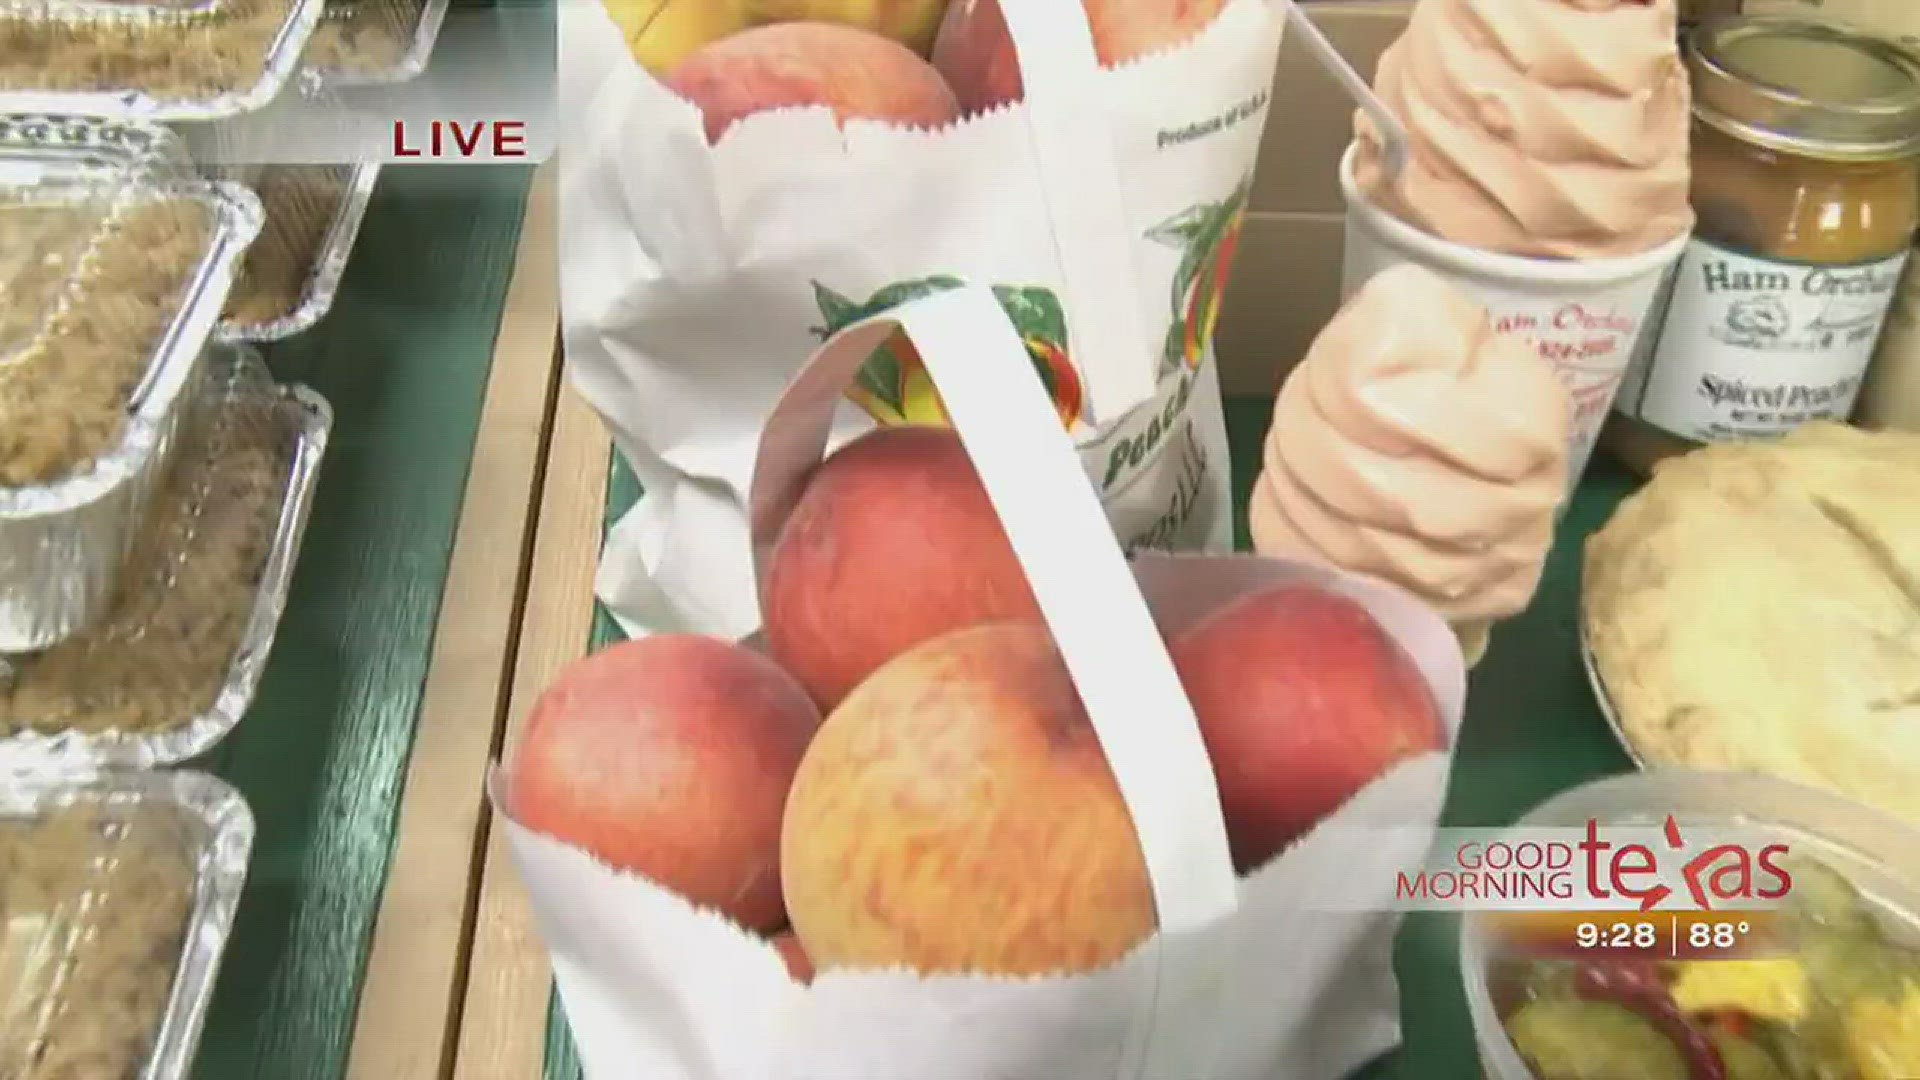 Tour the Store at Ham Orchards